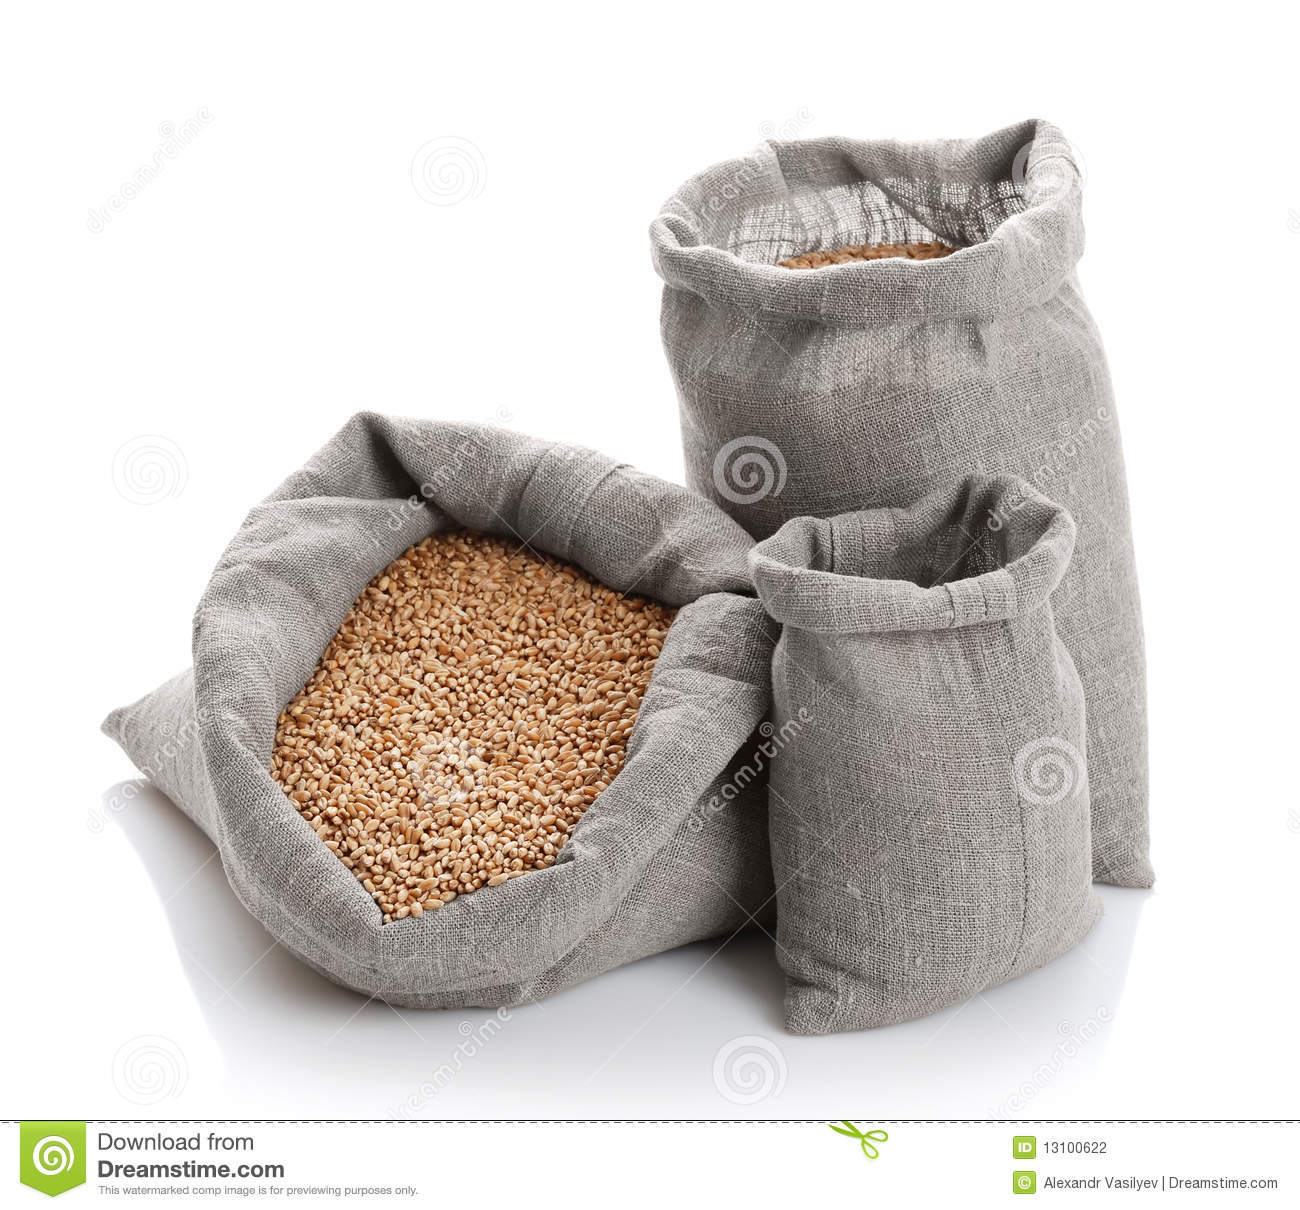 More Similar Stock Images Of   Grain Of The Wheat In Bags